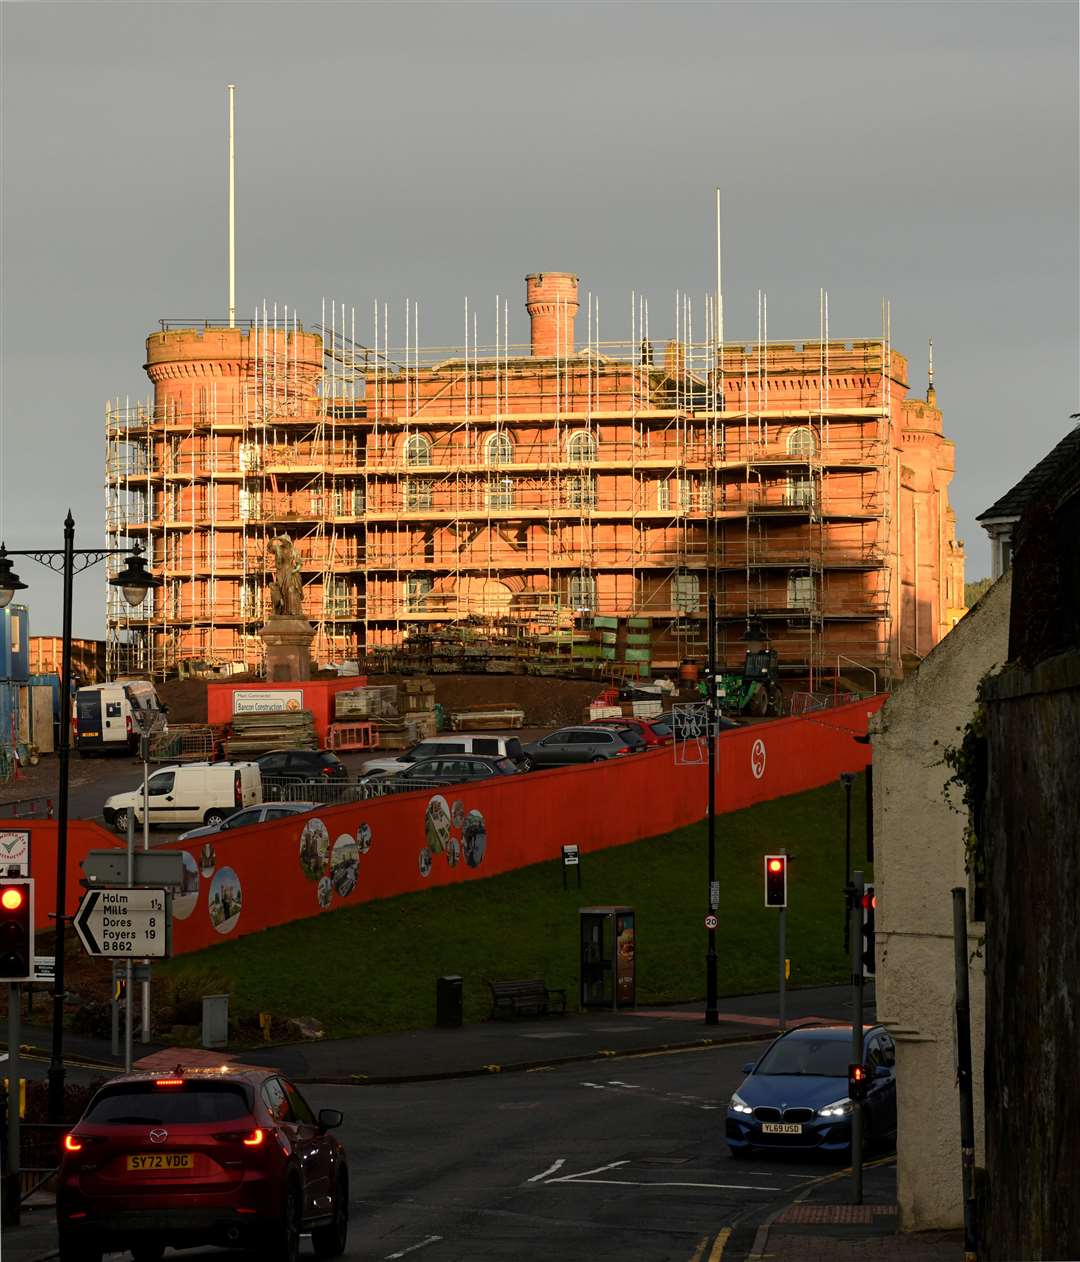 Work is ongoing at Inverness Castle.